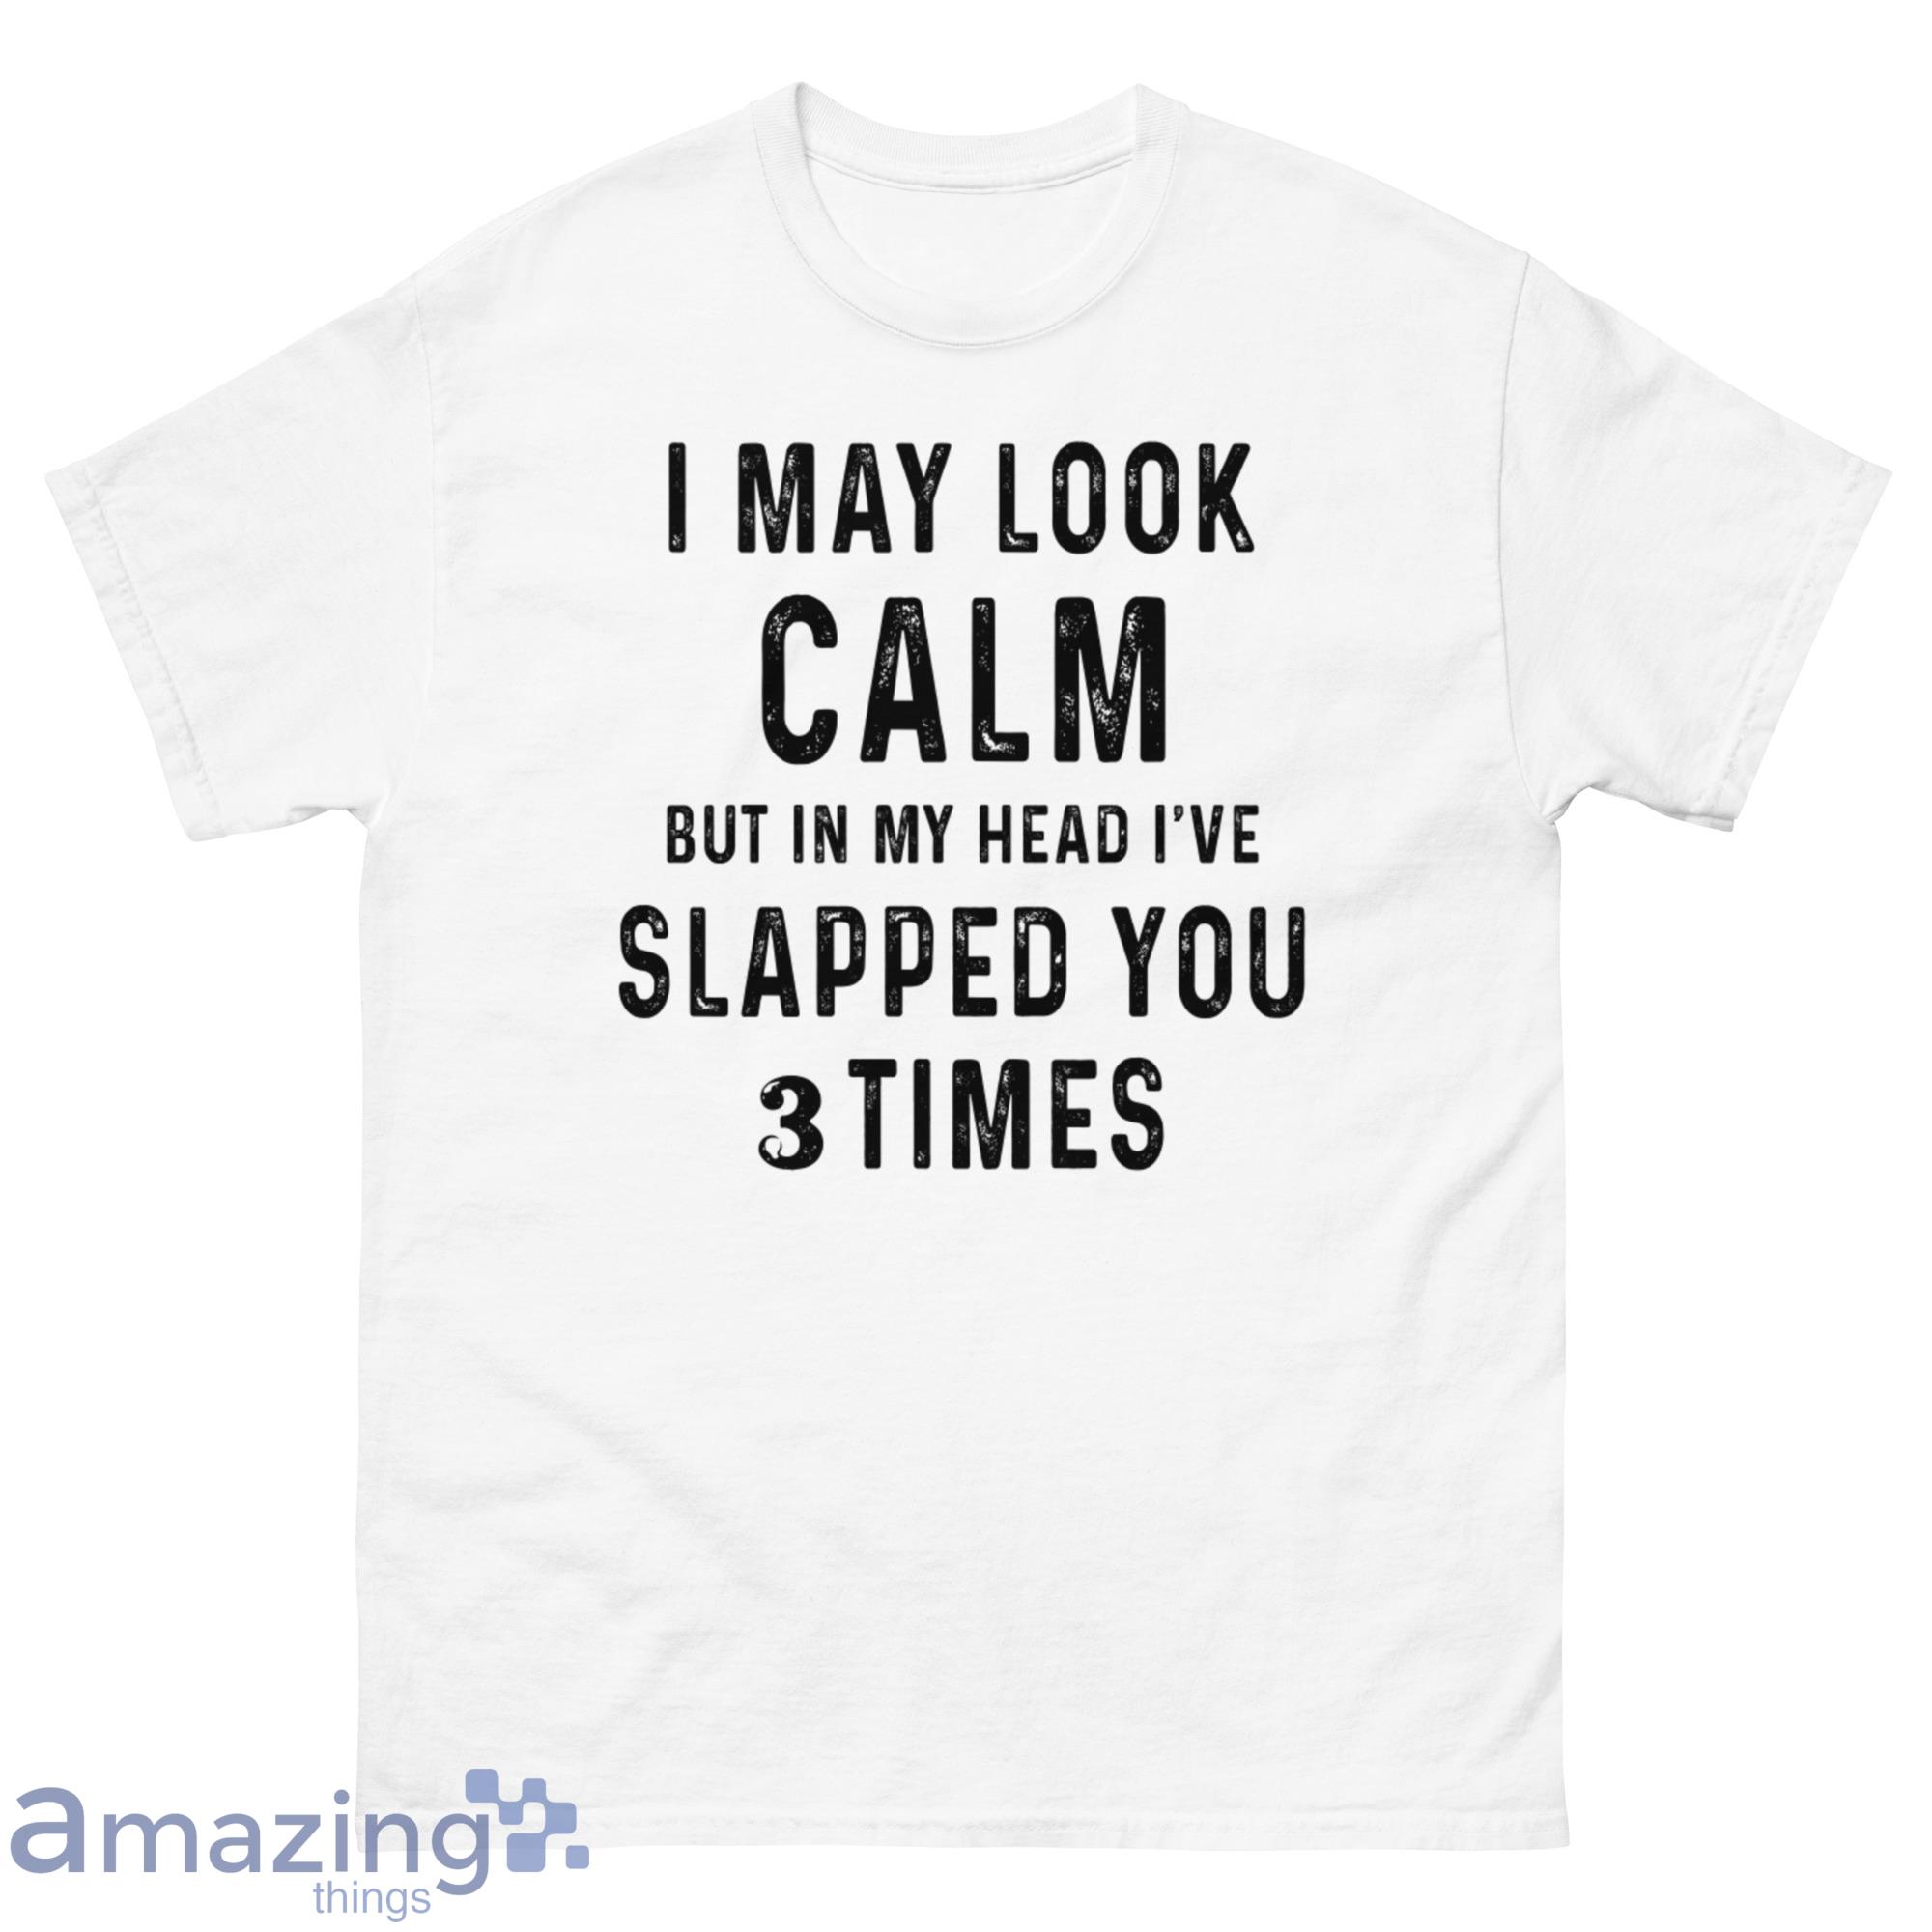 A May Look Clam But In My Head I've Slapped You 3 Times Shirt - G500 Men’s Classic T-Shirt-1